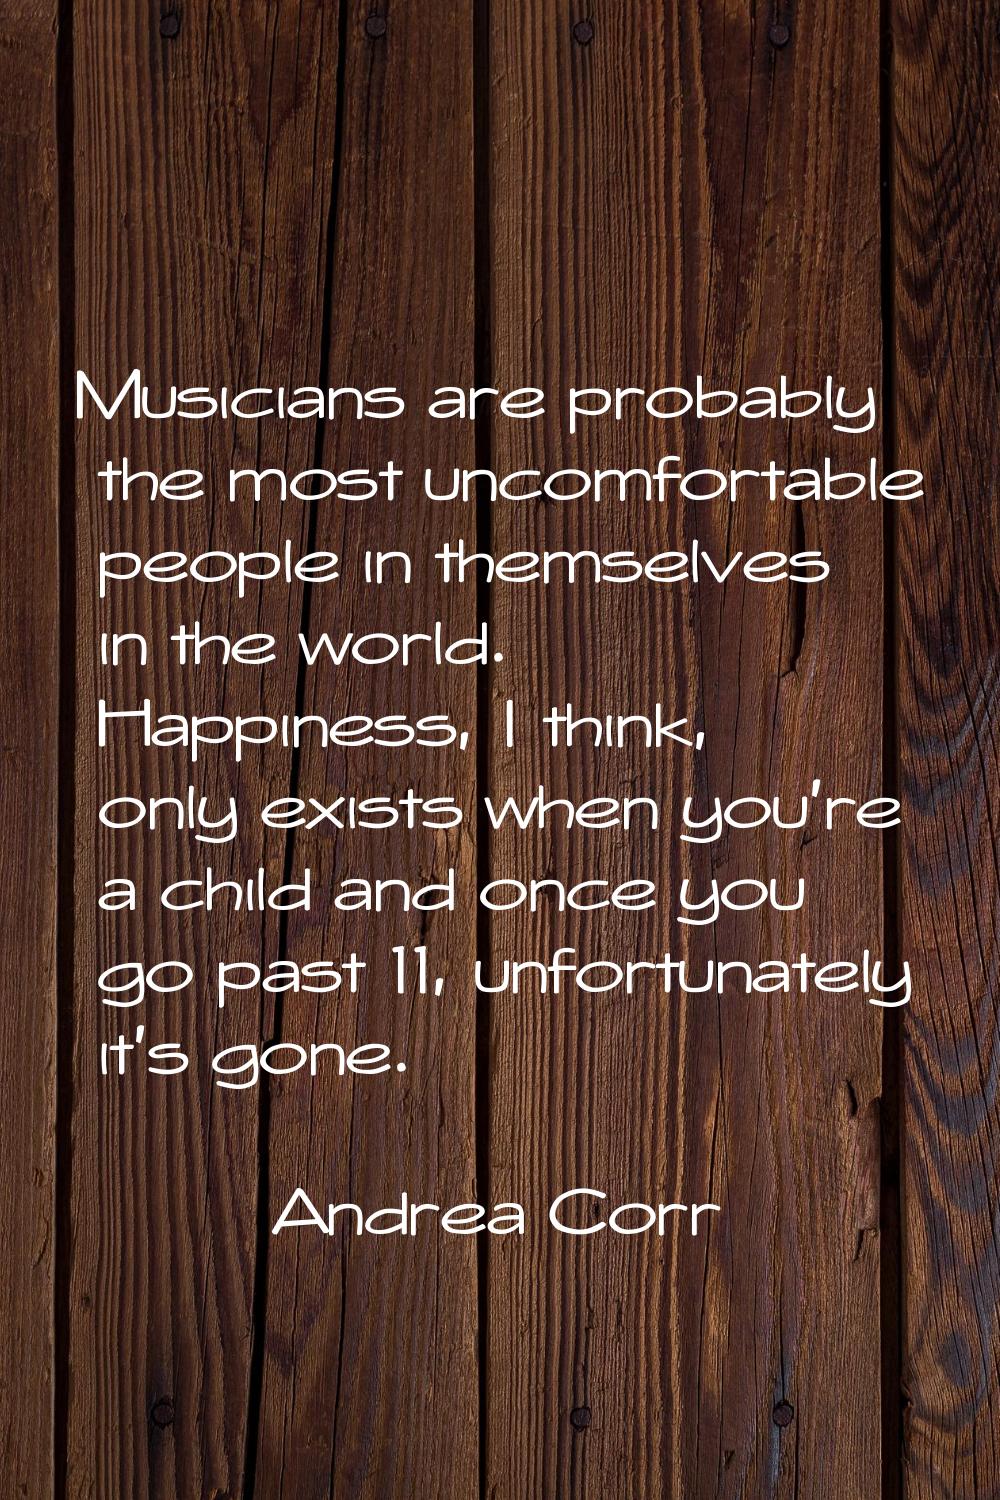 Musicians are probably the most uncomfortable people in themselves in the world. Happiness, I think